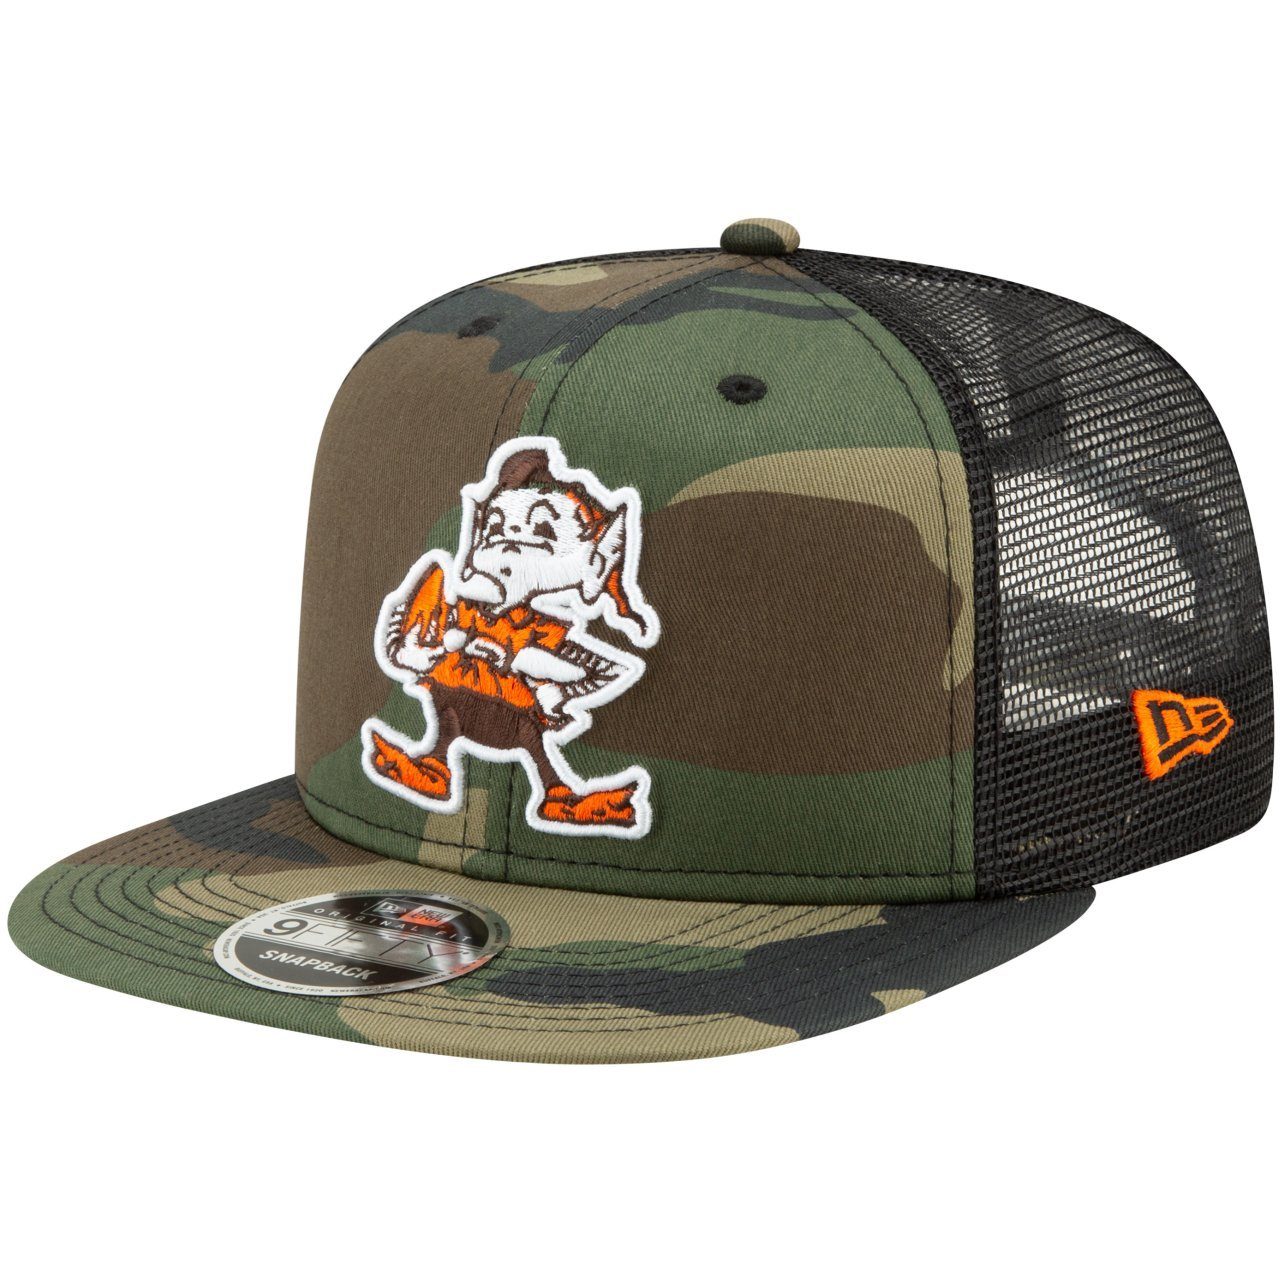 9Fifty Era Cleveland Cap New Browns Snapback Throwback